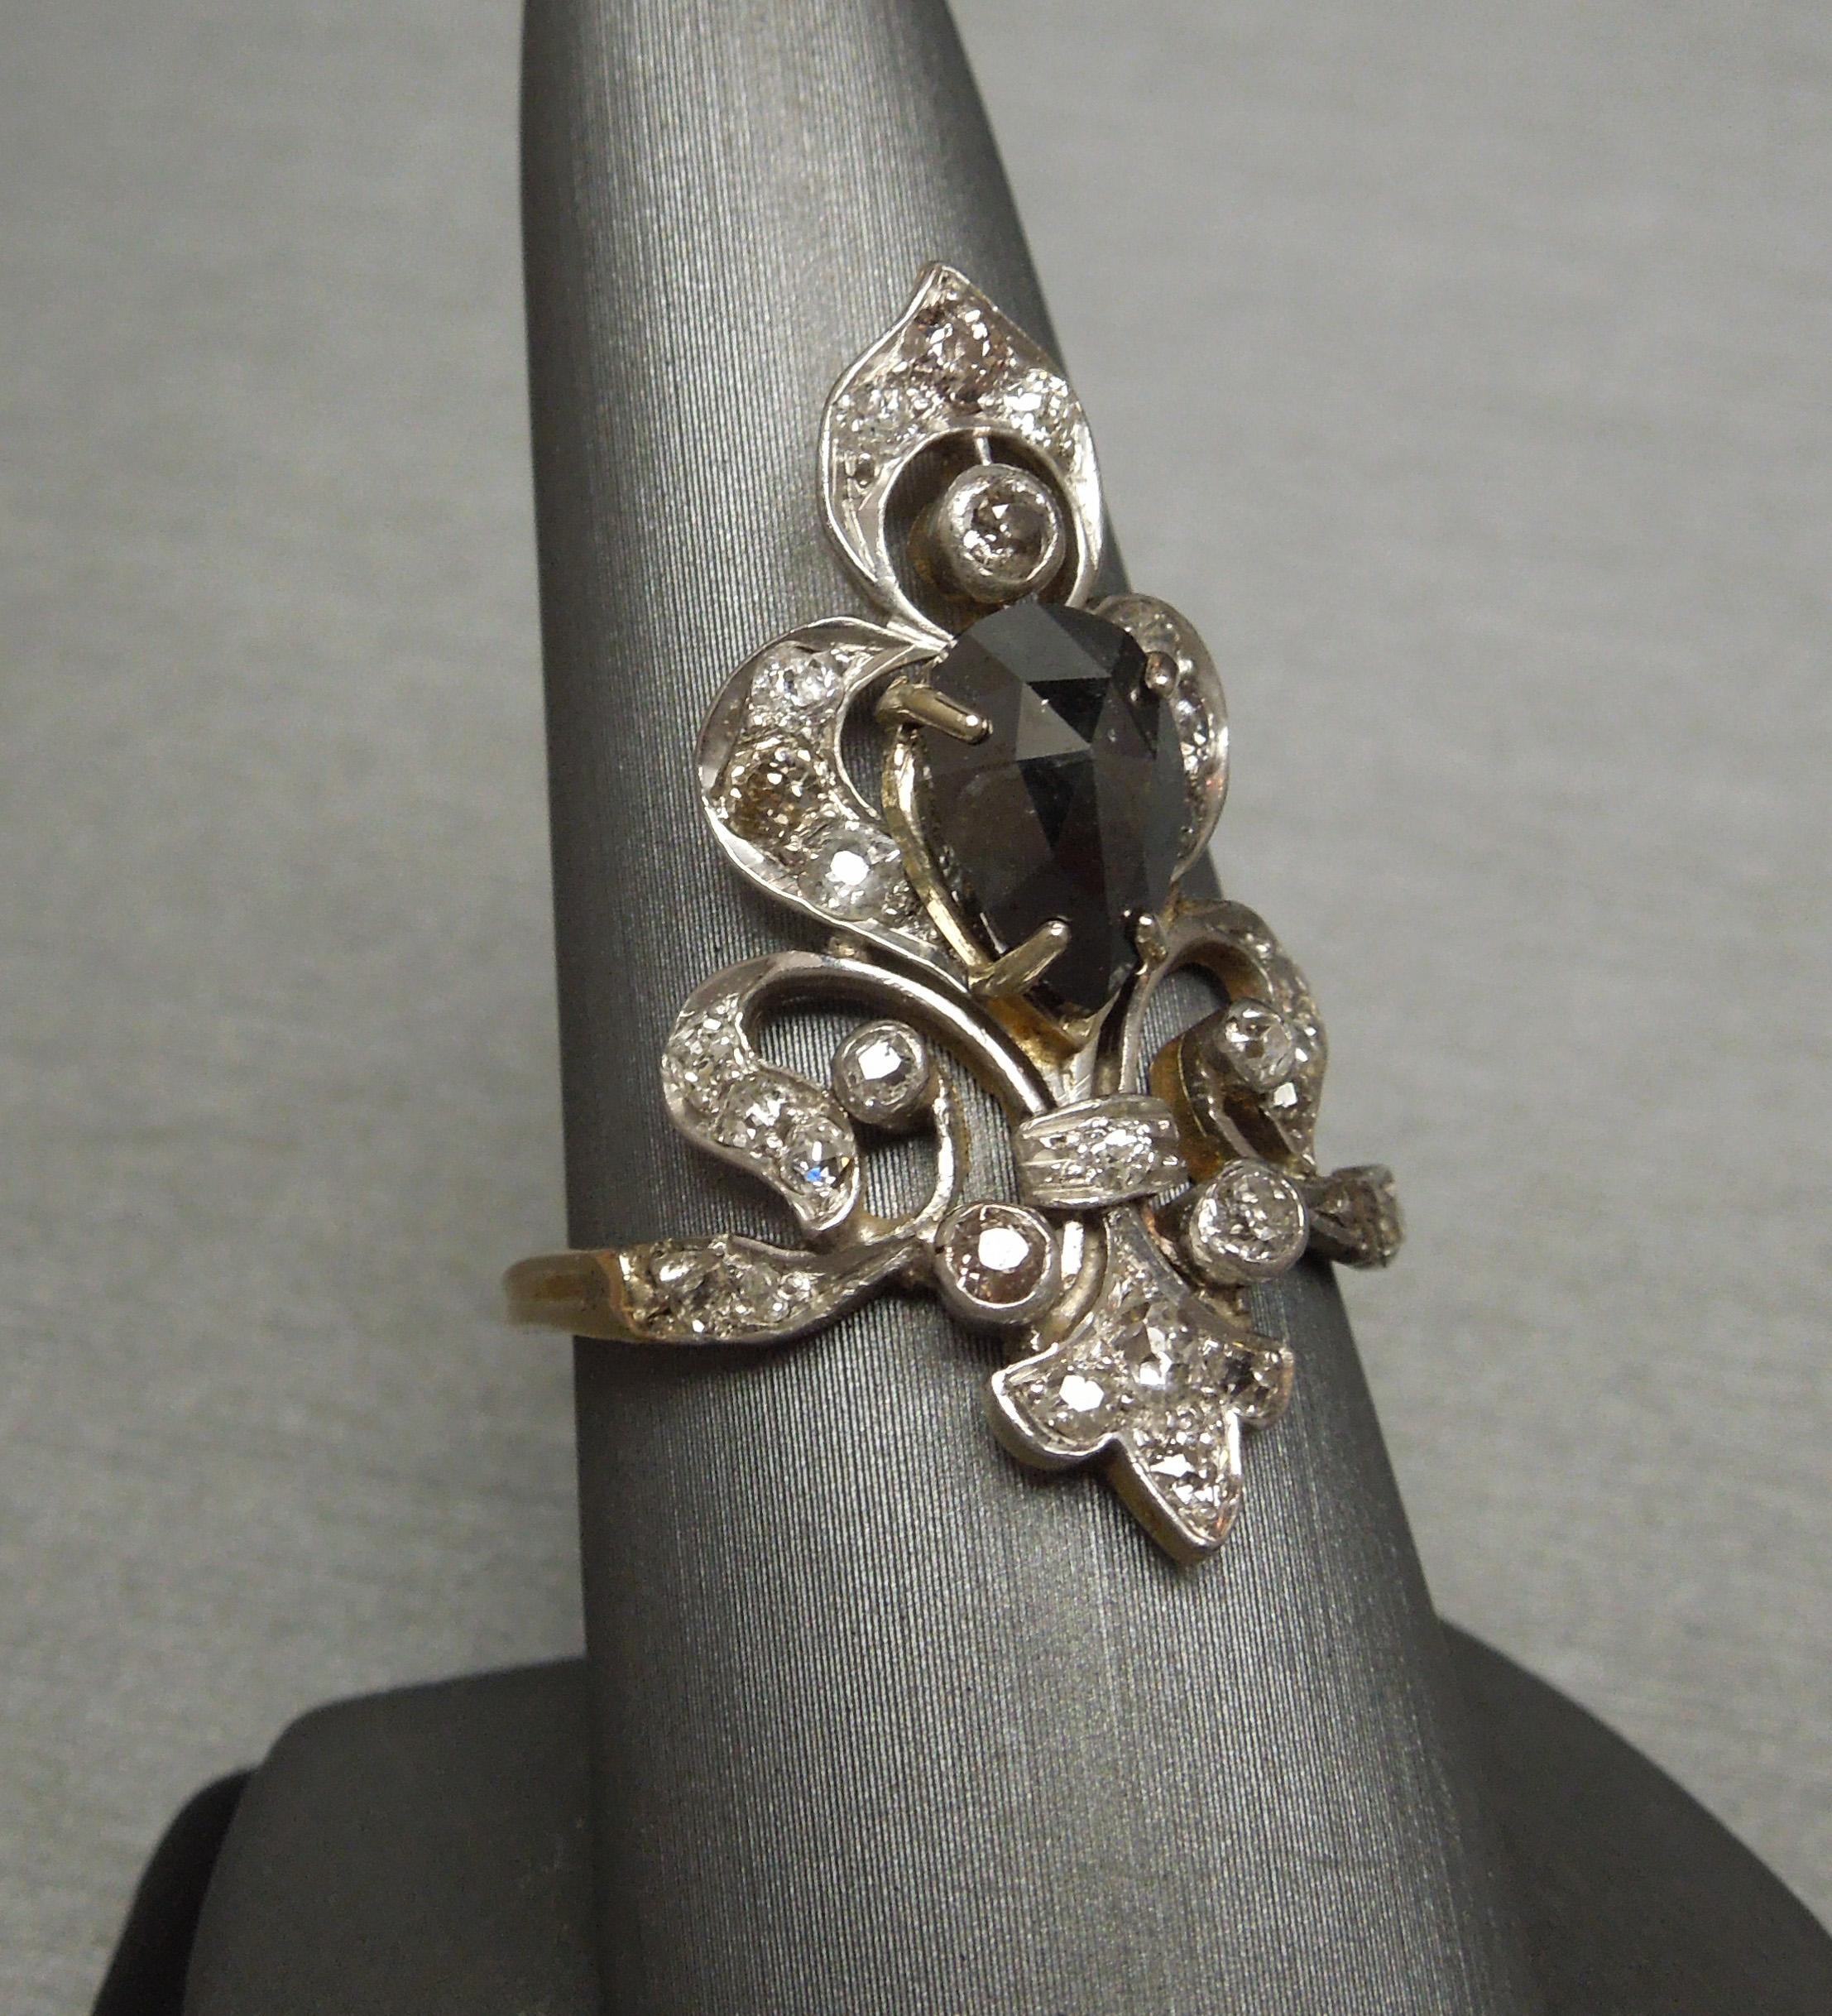 Constructed of a Sterling Silver top section & 14KT Yellow Gold base, this period Antique New Orleans Fleur de Lis Tiara style ring features a central 1.80 carat Pear cut Natural Black Diamond with several alternating White & Champagne Old European